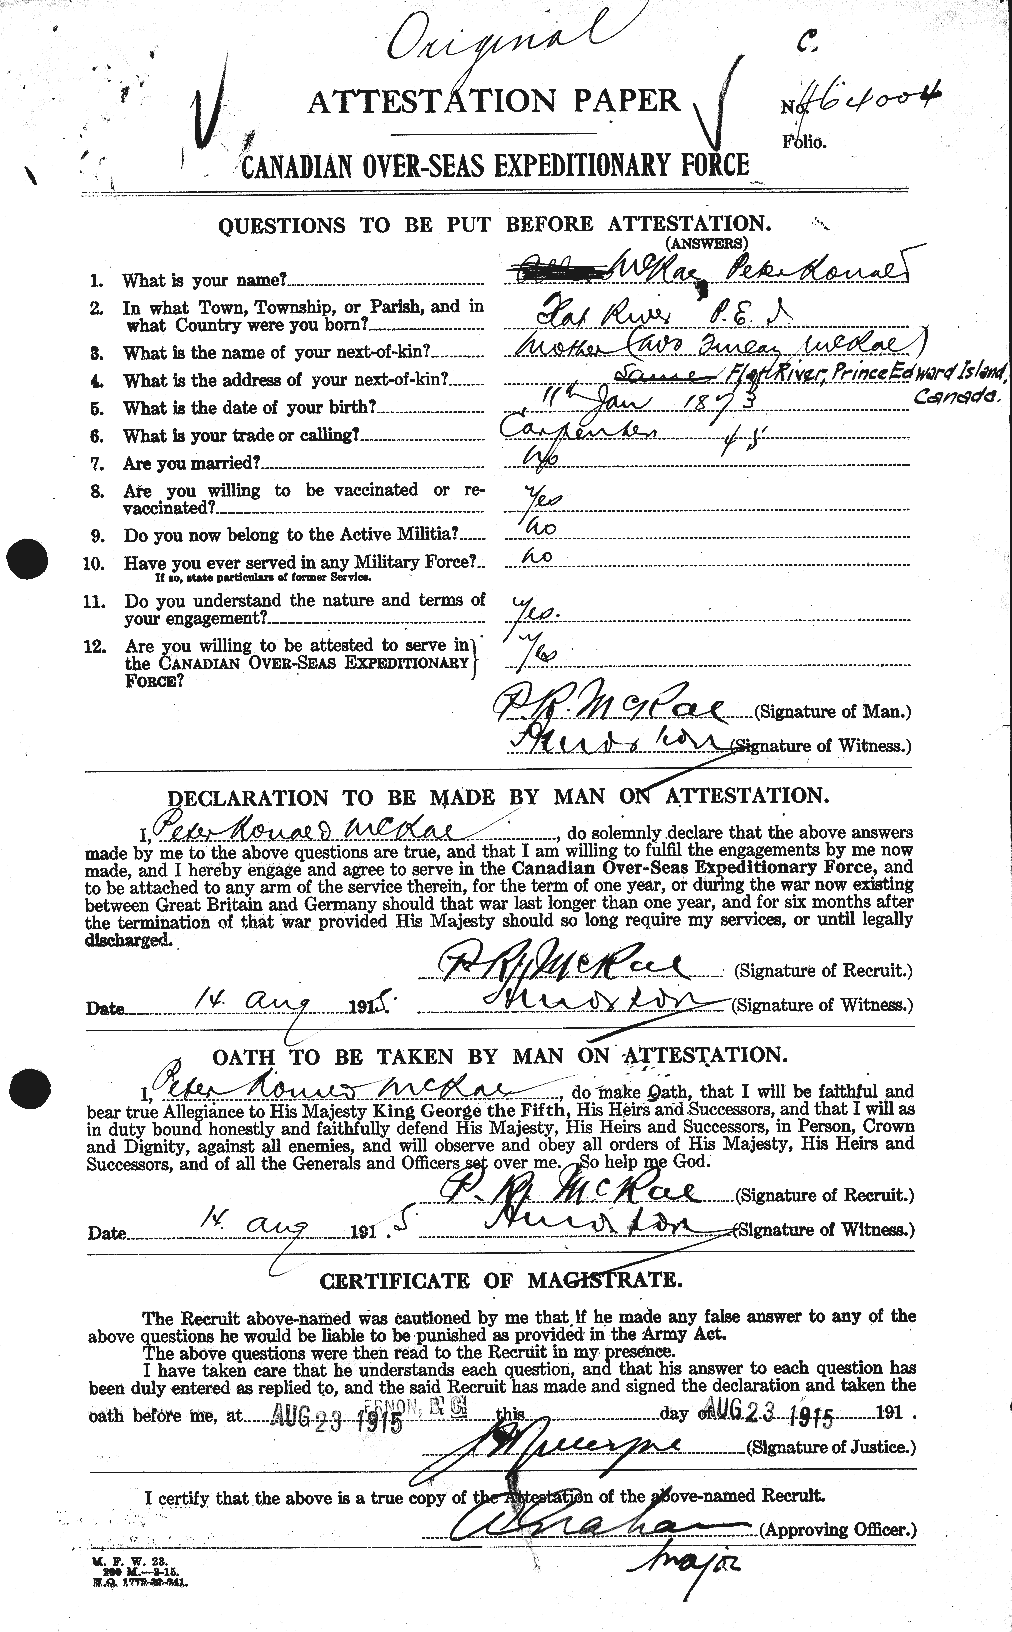 Personnel Records of the First World War - CEF 542910a